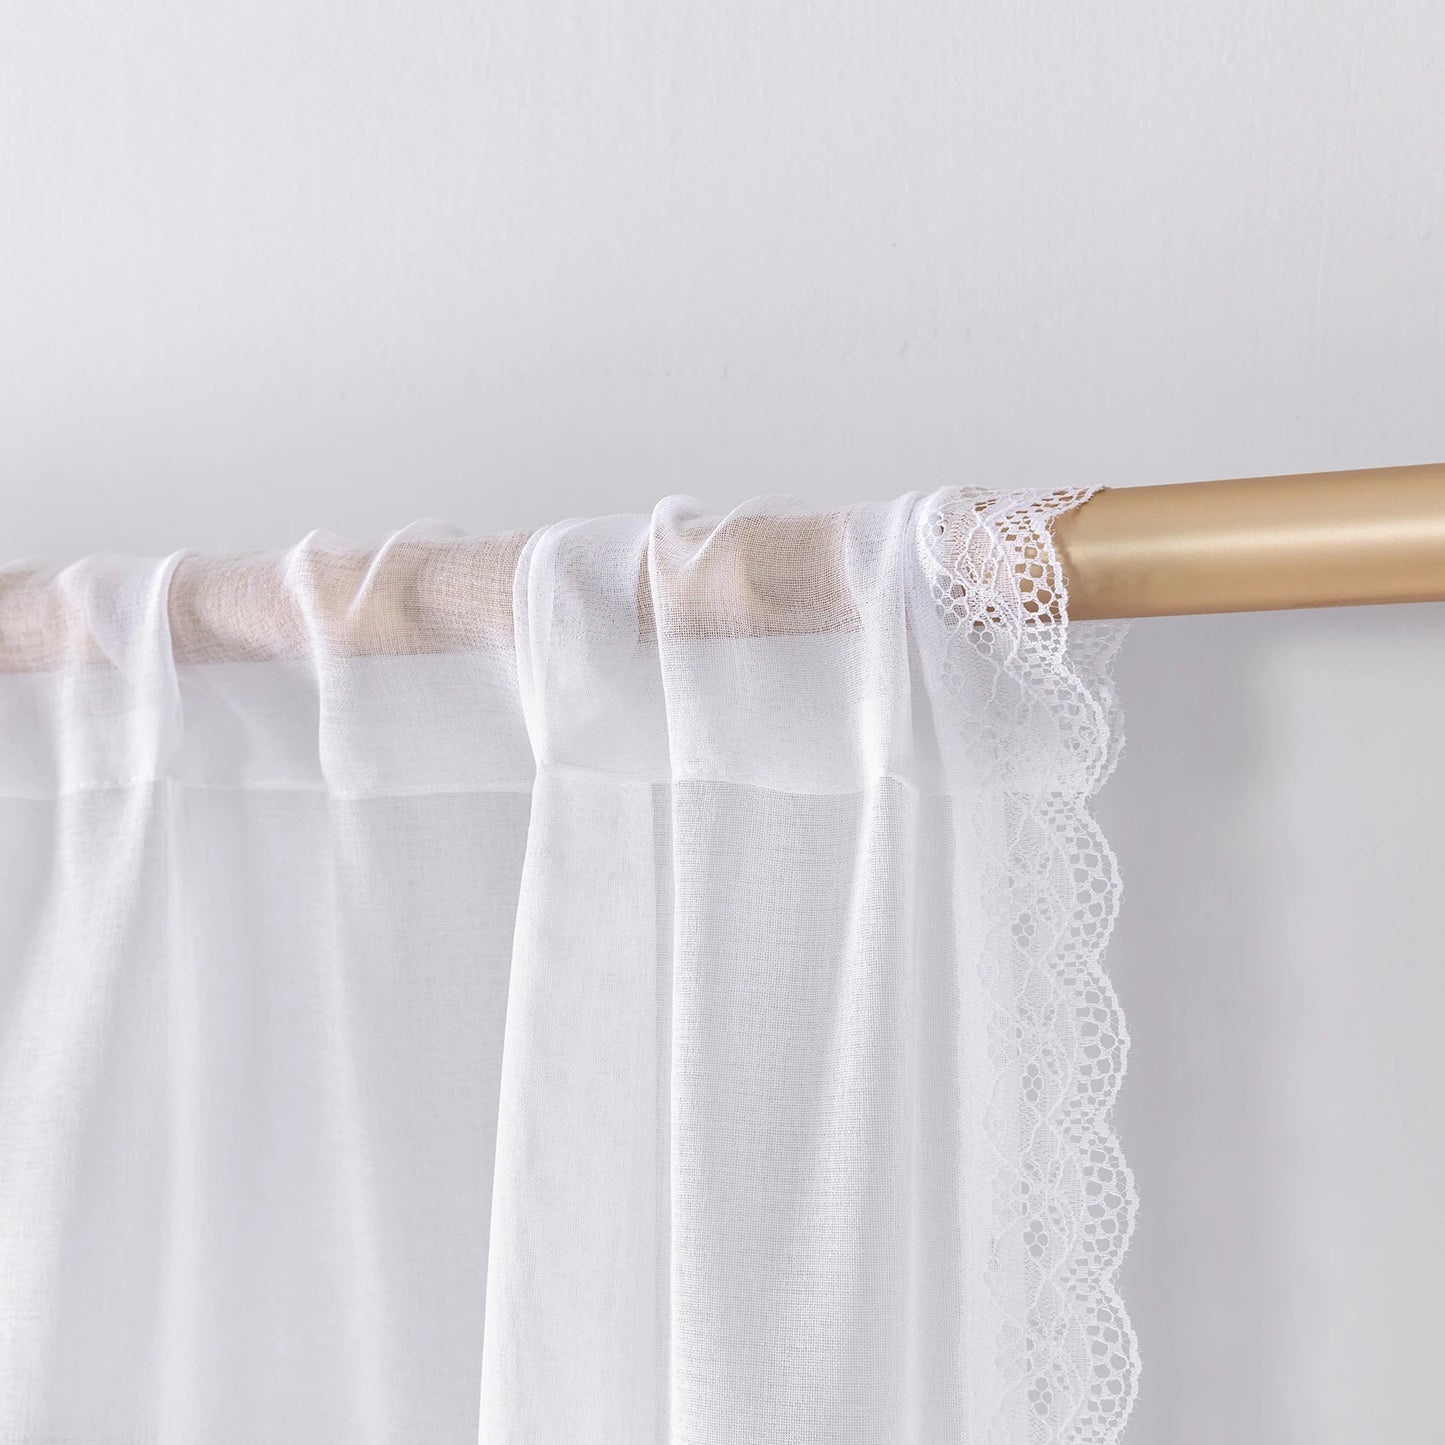 Embroidered Lace Sheer Valance Curtains: Elegant Window Dressing for Kitchen and Bedroom